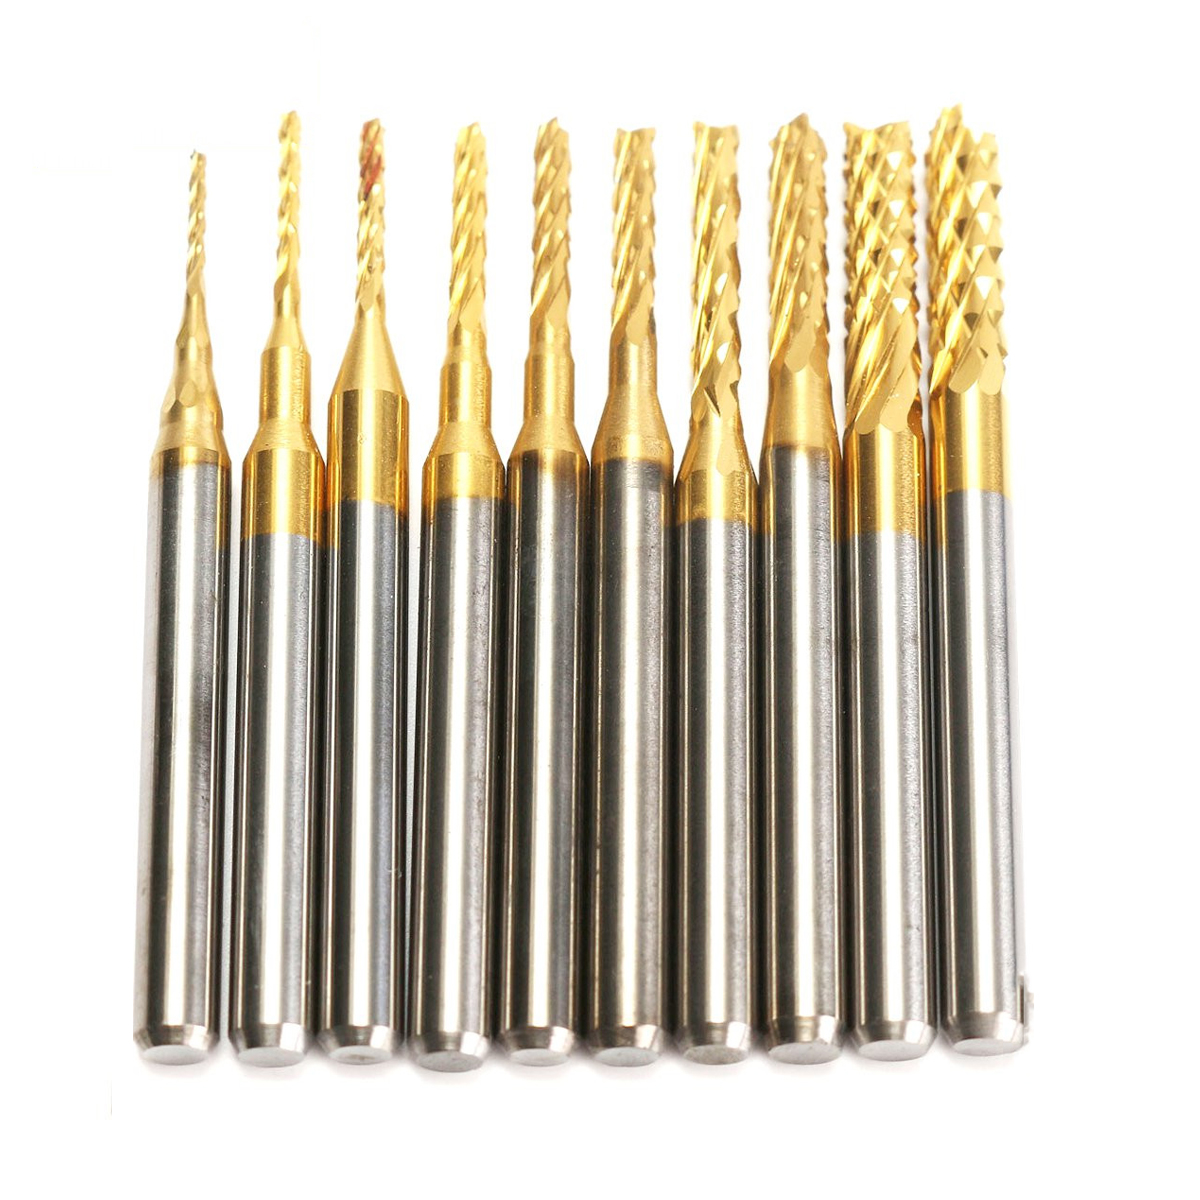 Drillpro 10pcs 1.3mm-3.175mm Carbide End Mill Engraving Bits for CNC PCB Rotary 